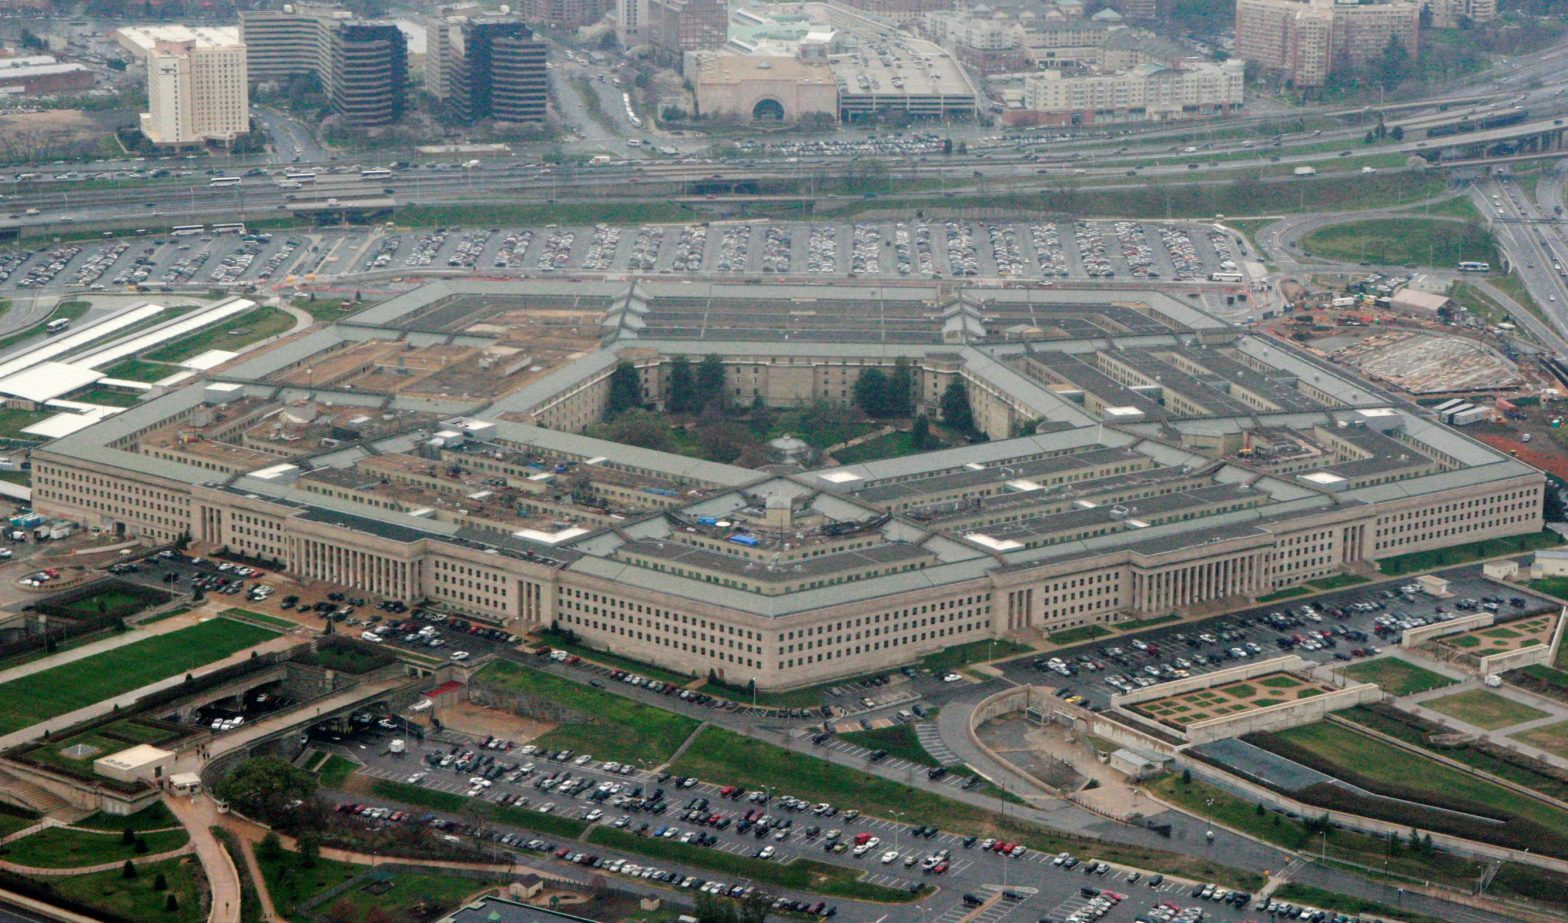 DOD to Perform First Review of Private Contracts In Over 30 Years